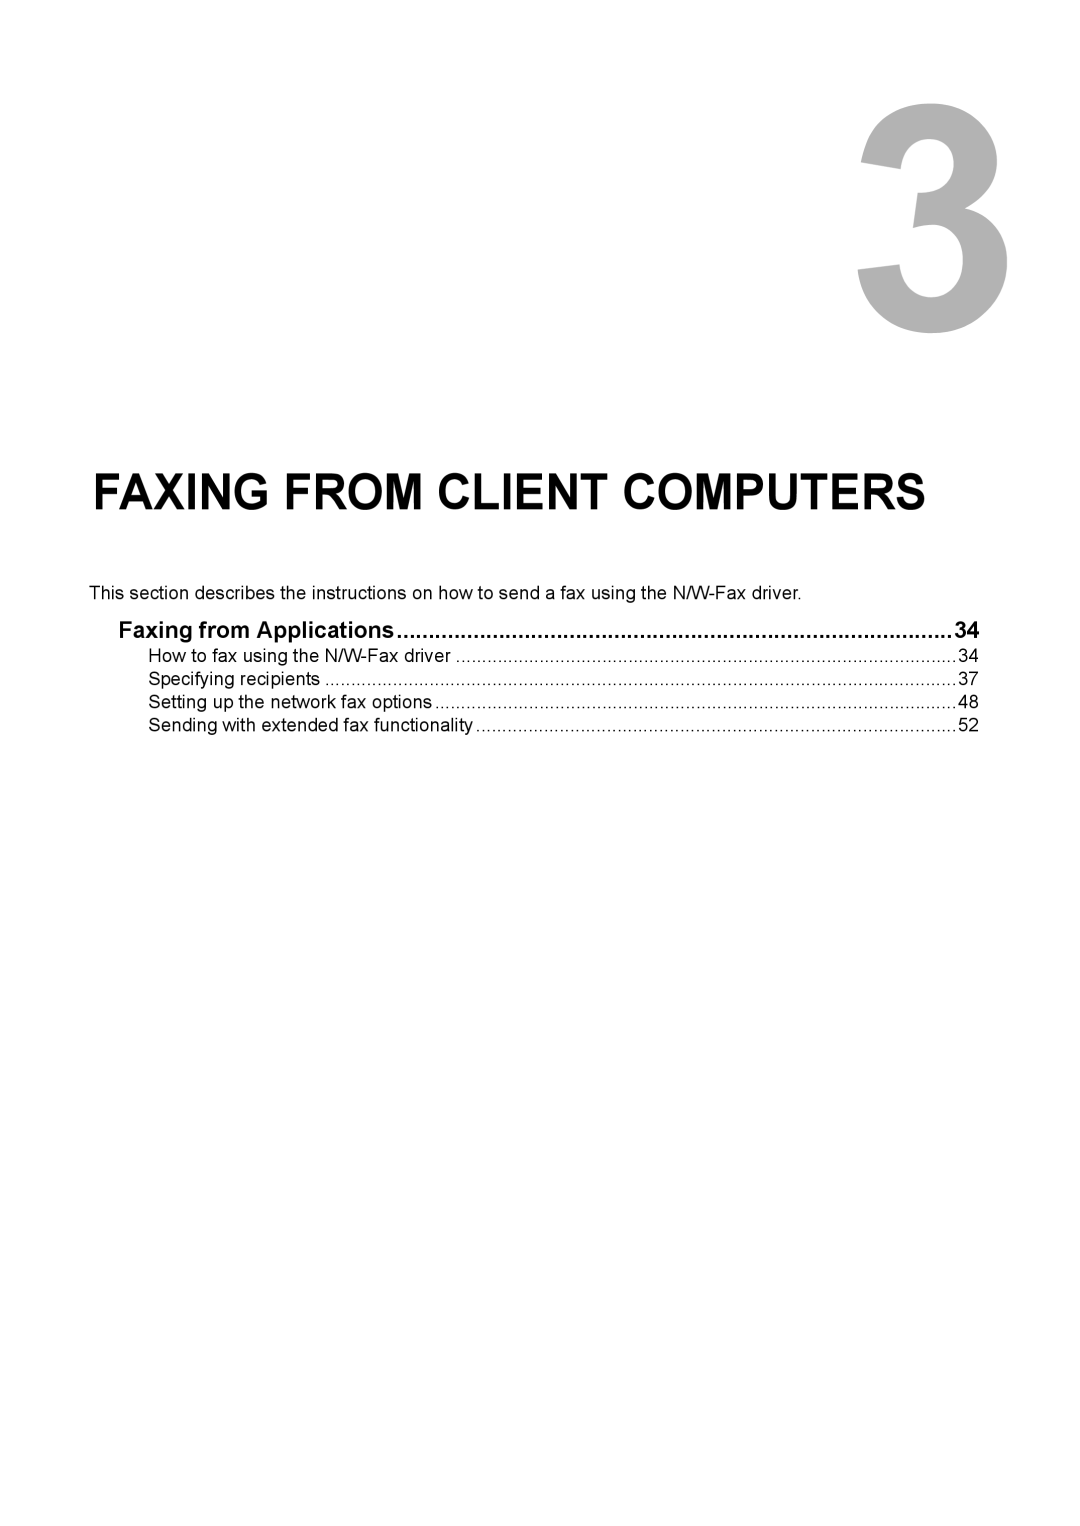 Toshiba GA-1191 manual Faxing from Client Computers, Faxing from Applications 